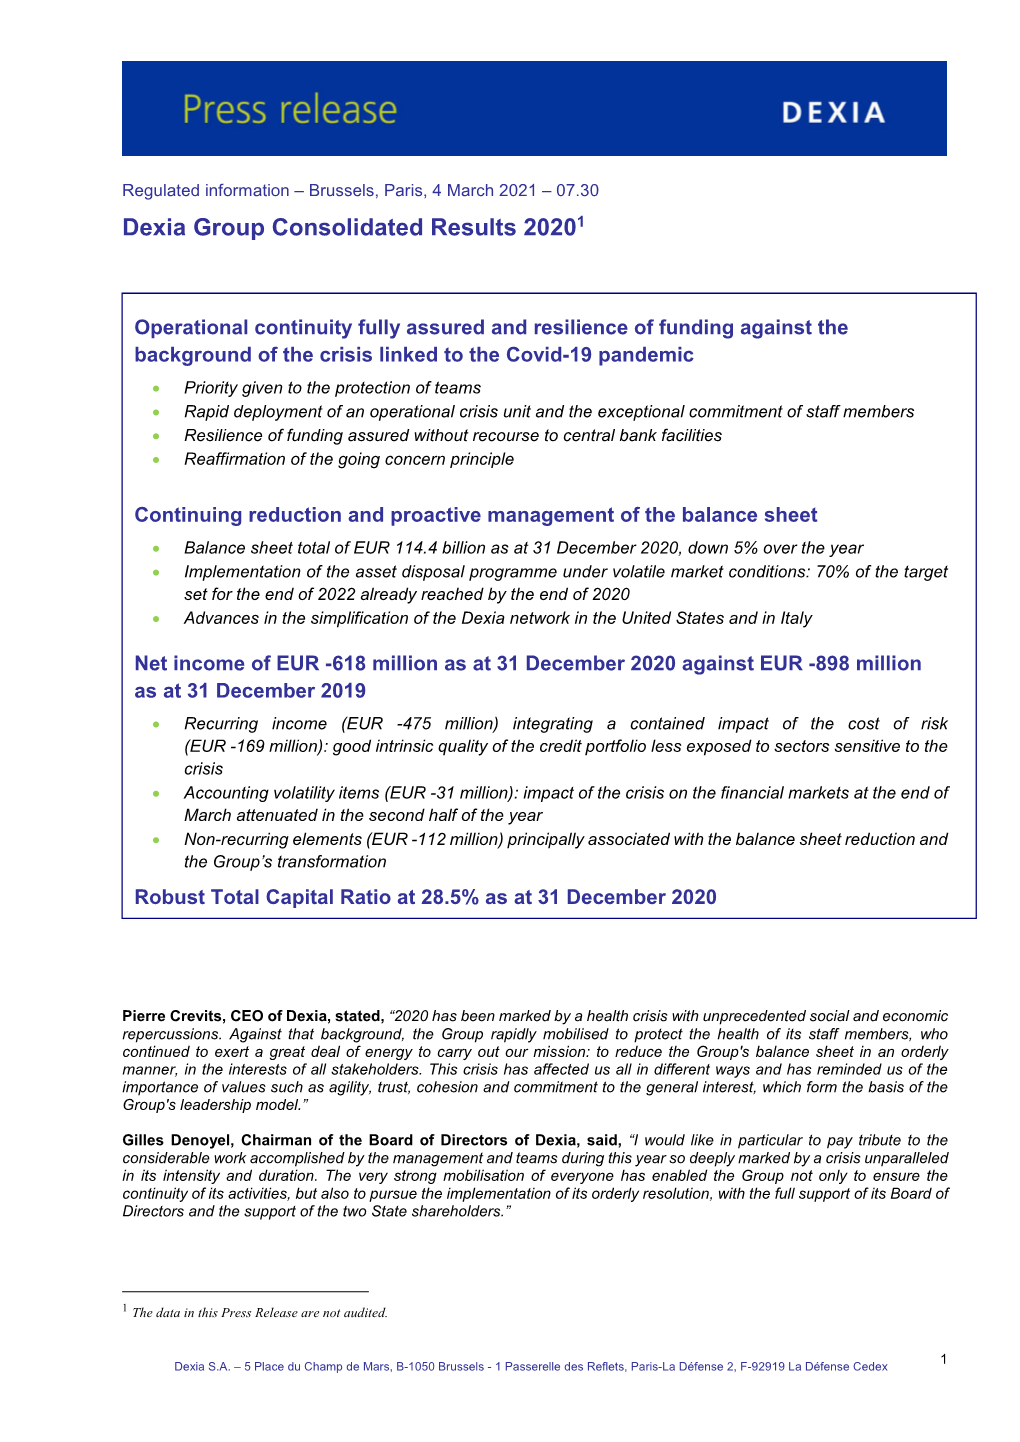 Dexia Group Consolidated Results 20201